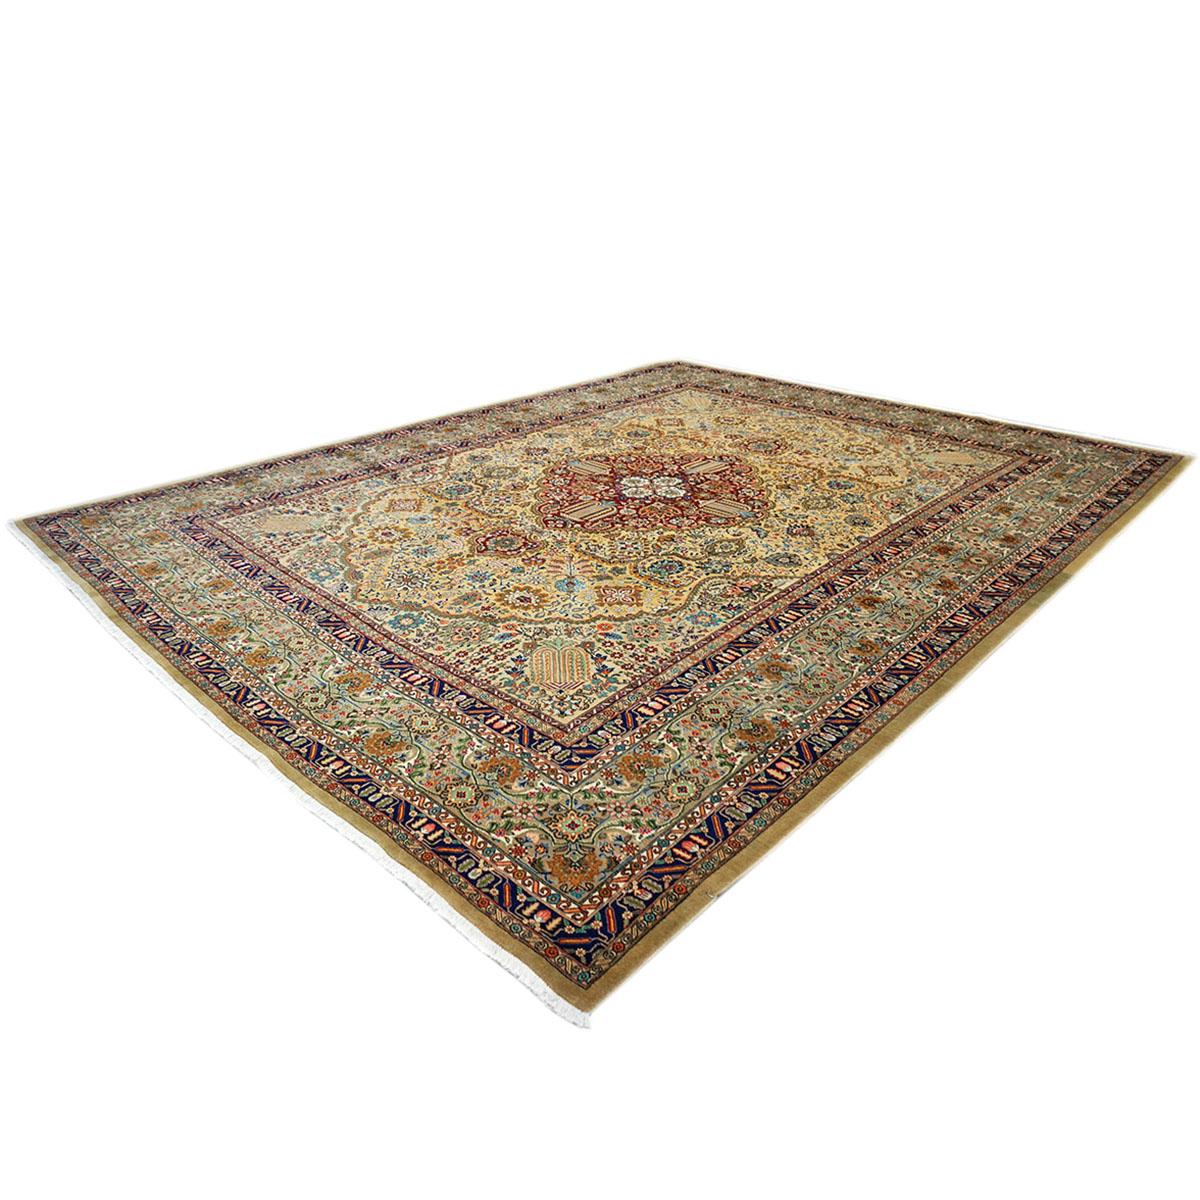 Antique Persian Tabriz 10x13 Tan, Taupe, Navy, & Gold Handmade Area Rug For Sale 1